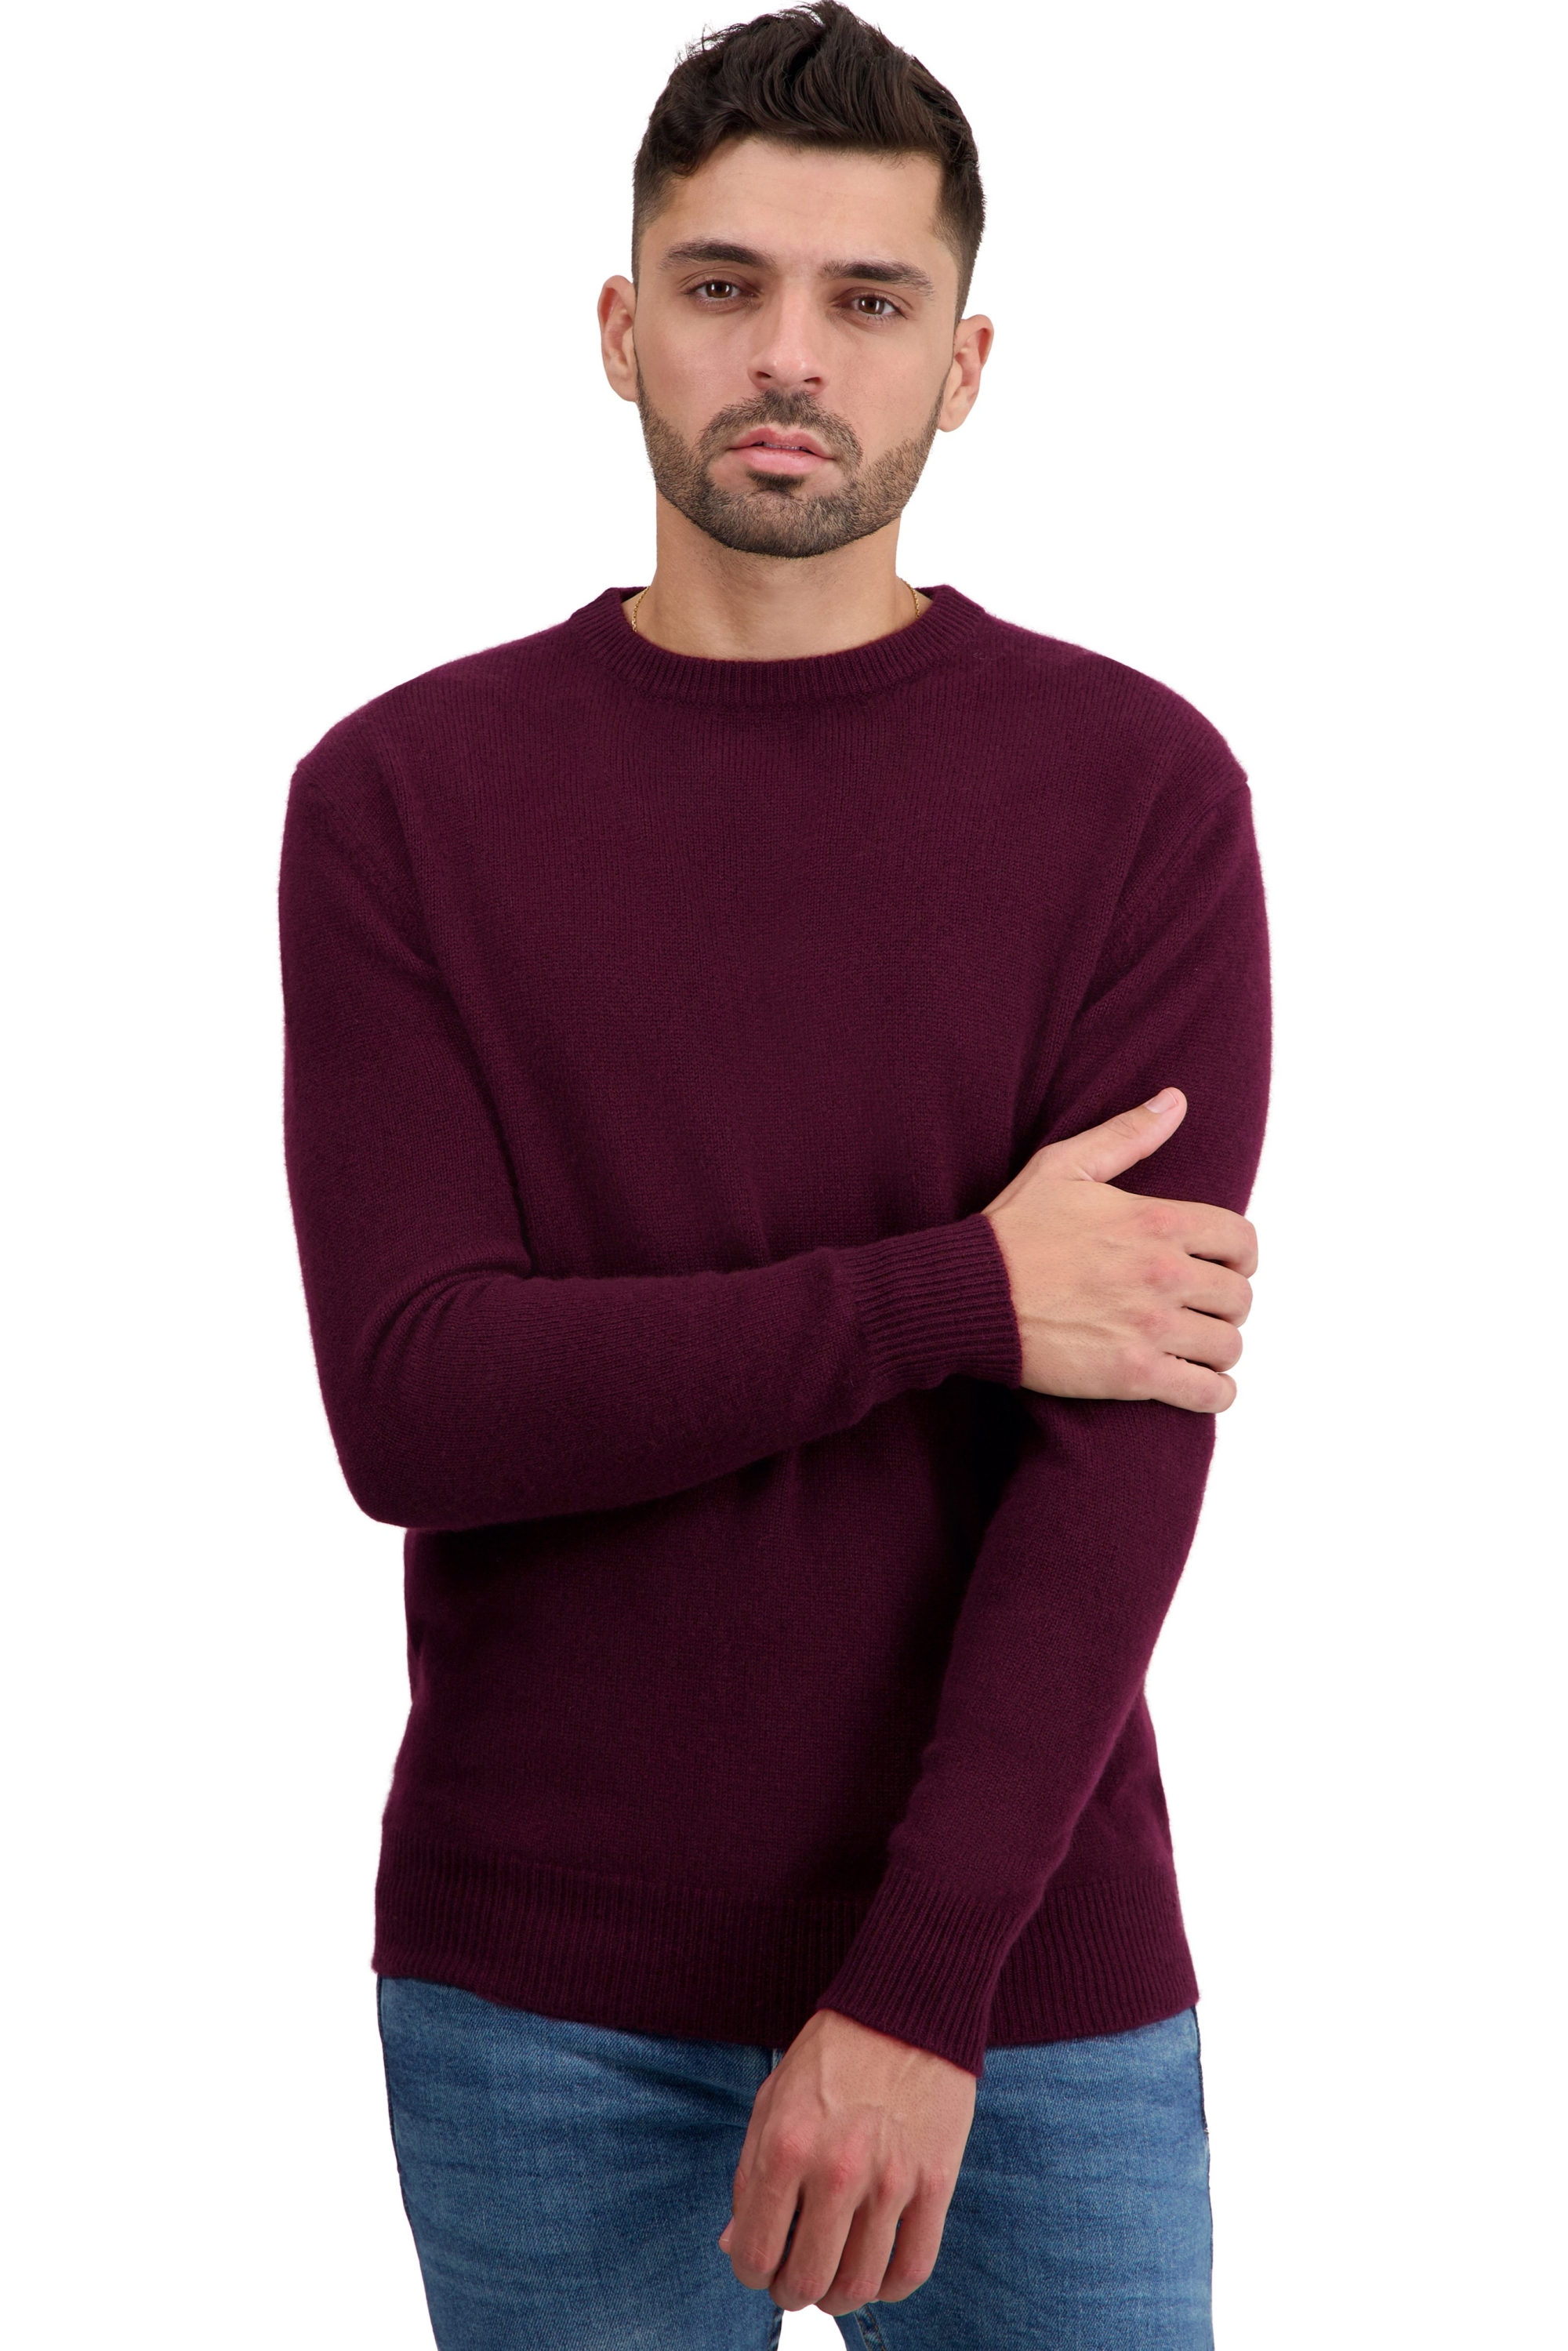 Cashmere men basic sweaters at low prices touraine first bordeaux 3xl